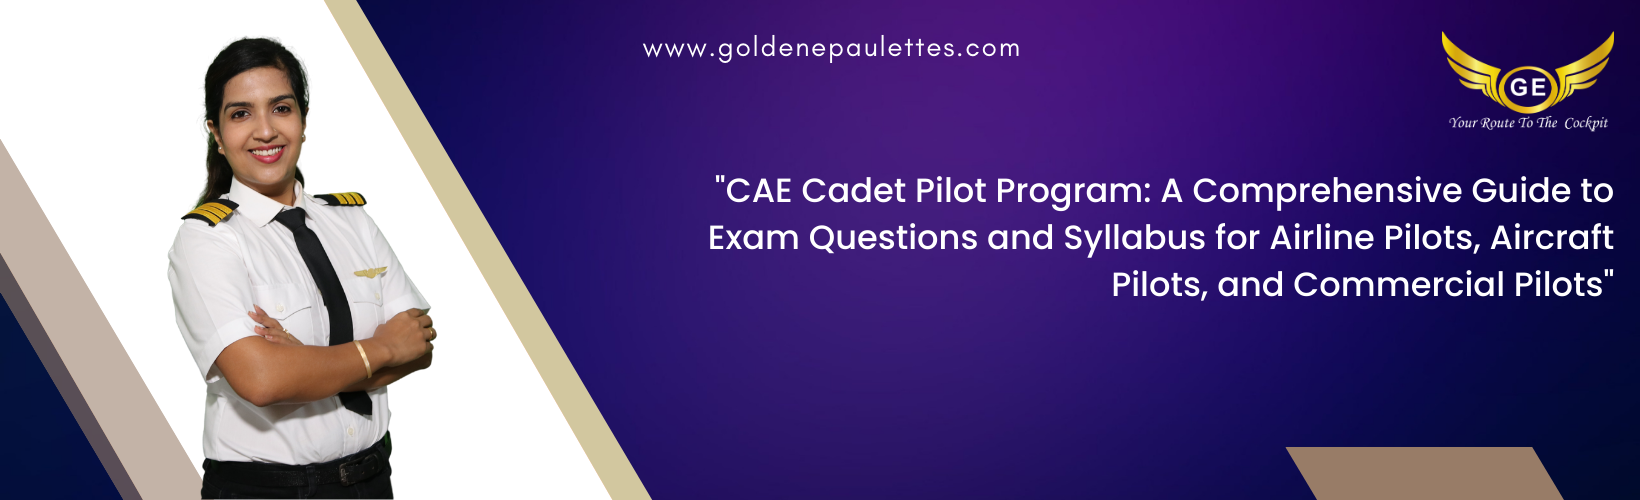 Exam Questions and Syllabus in the CAE Cadet Pilot Program